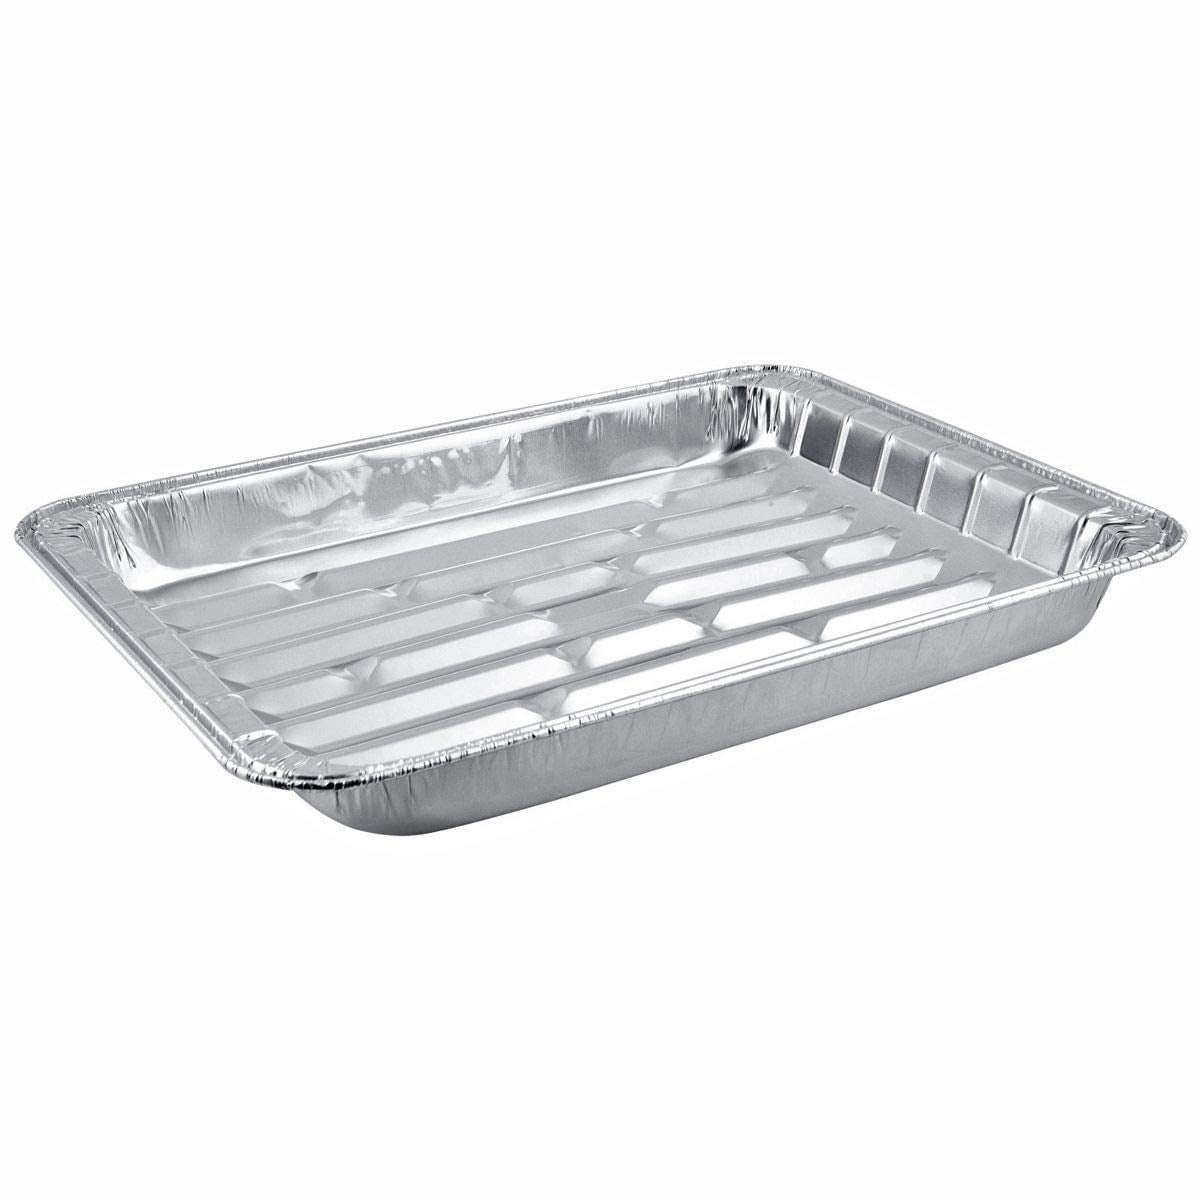 Trays Plate Tray Dredging Kitchen Pan Stainless Breading Pans Bakeware Bake  Supplies Barbecue Sushi Rustproof Food 